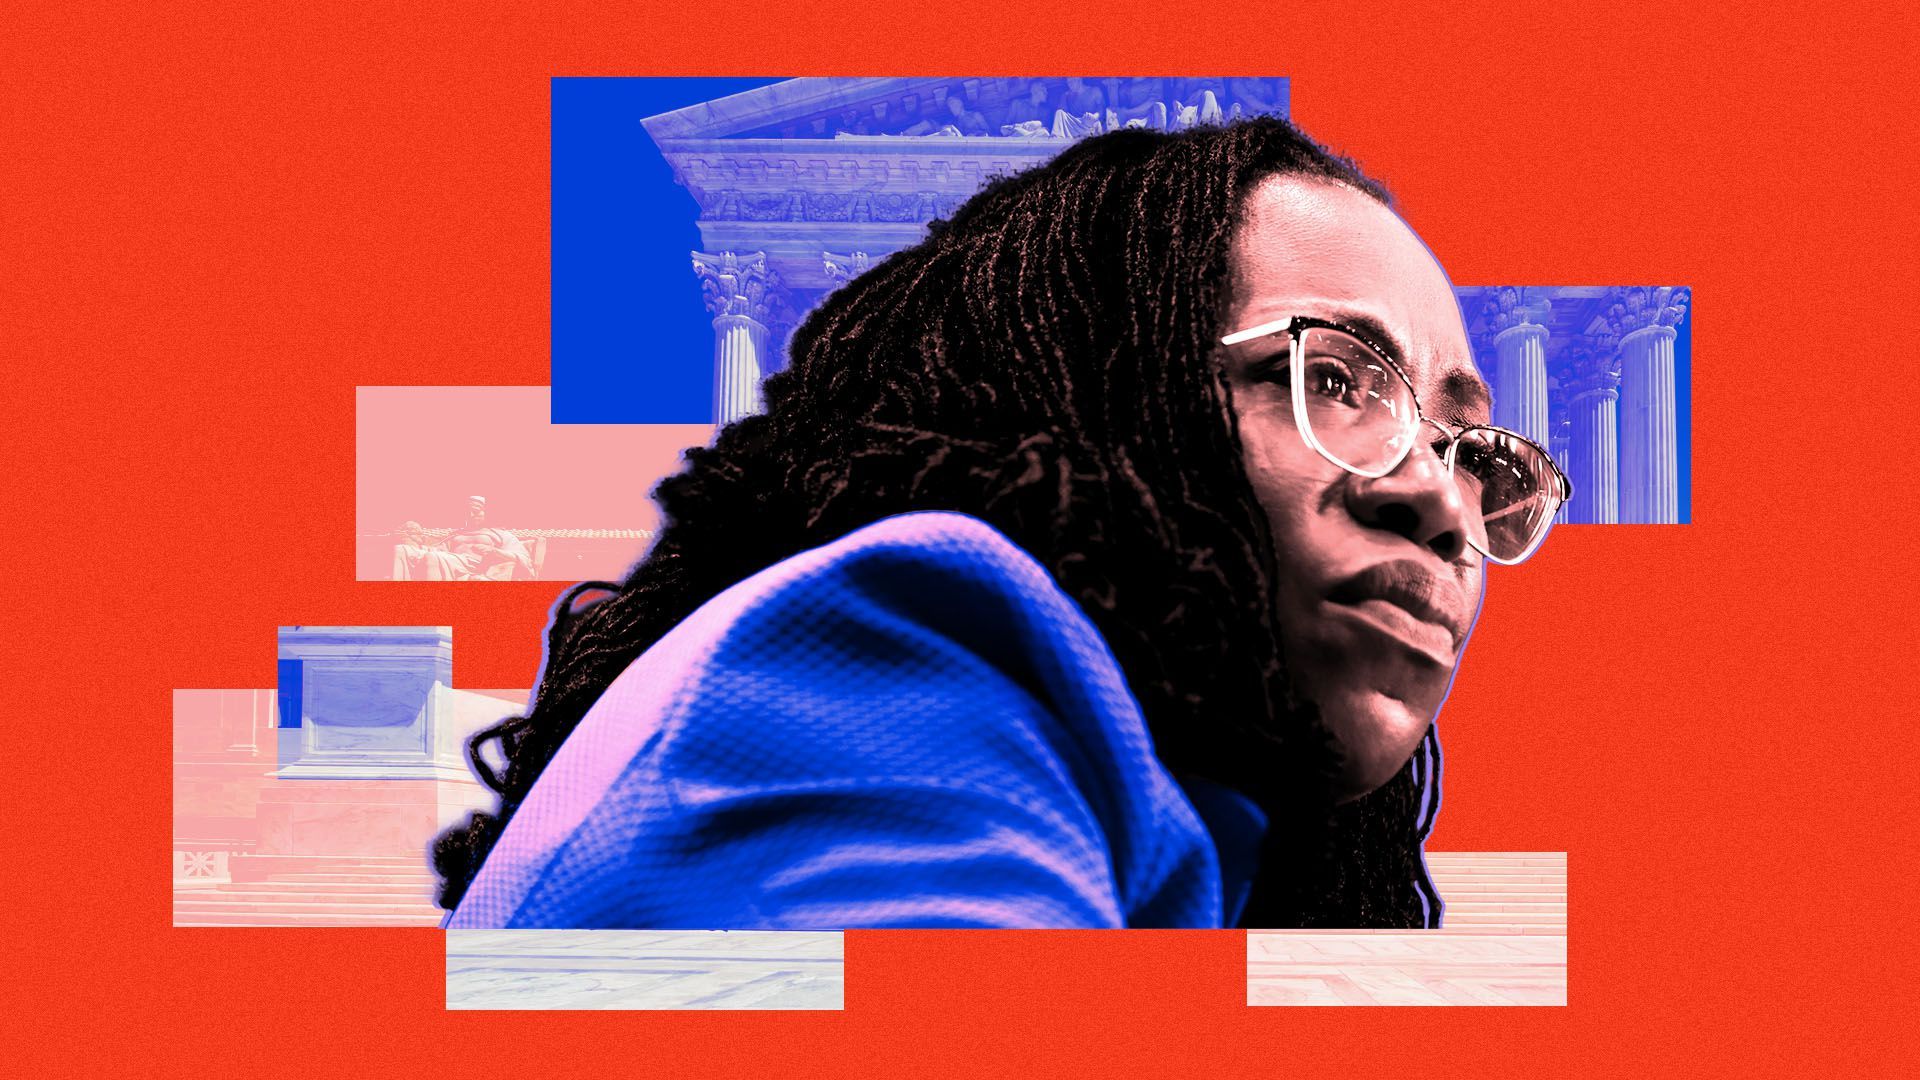 Photo illustration of Ketanji Brown Jackson surrounded by shapes and image of the Supreme Court building